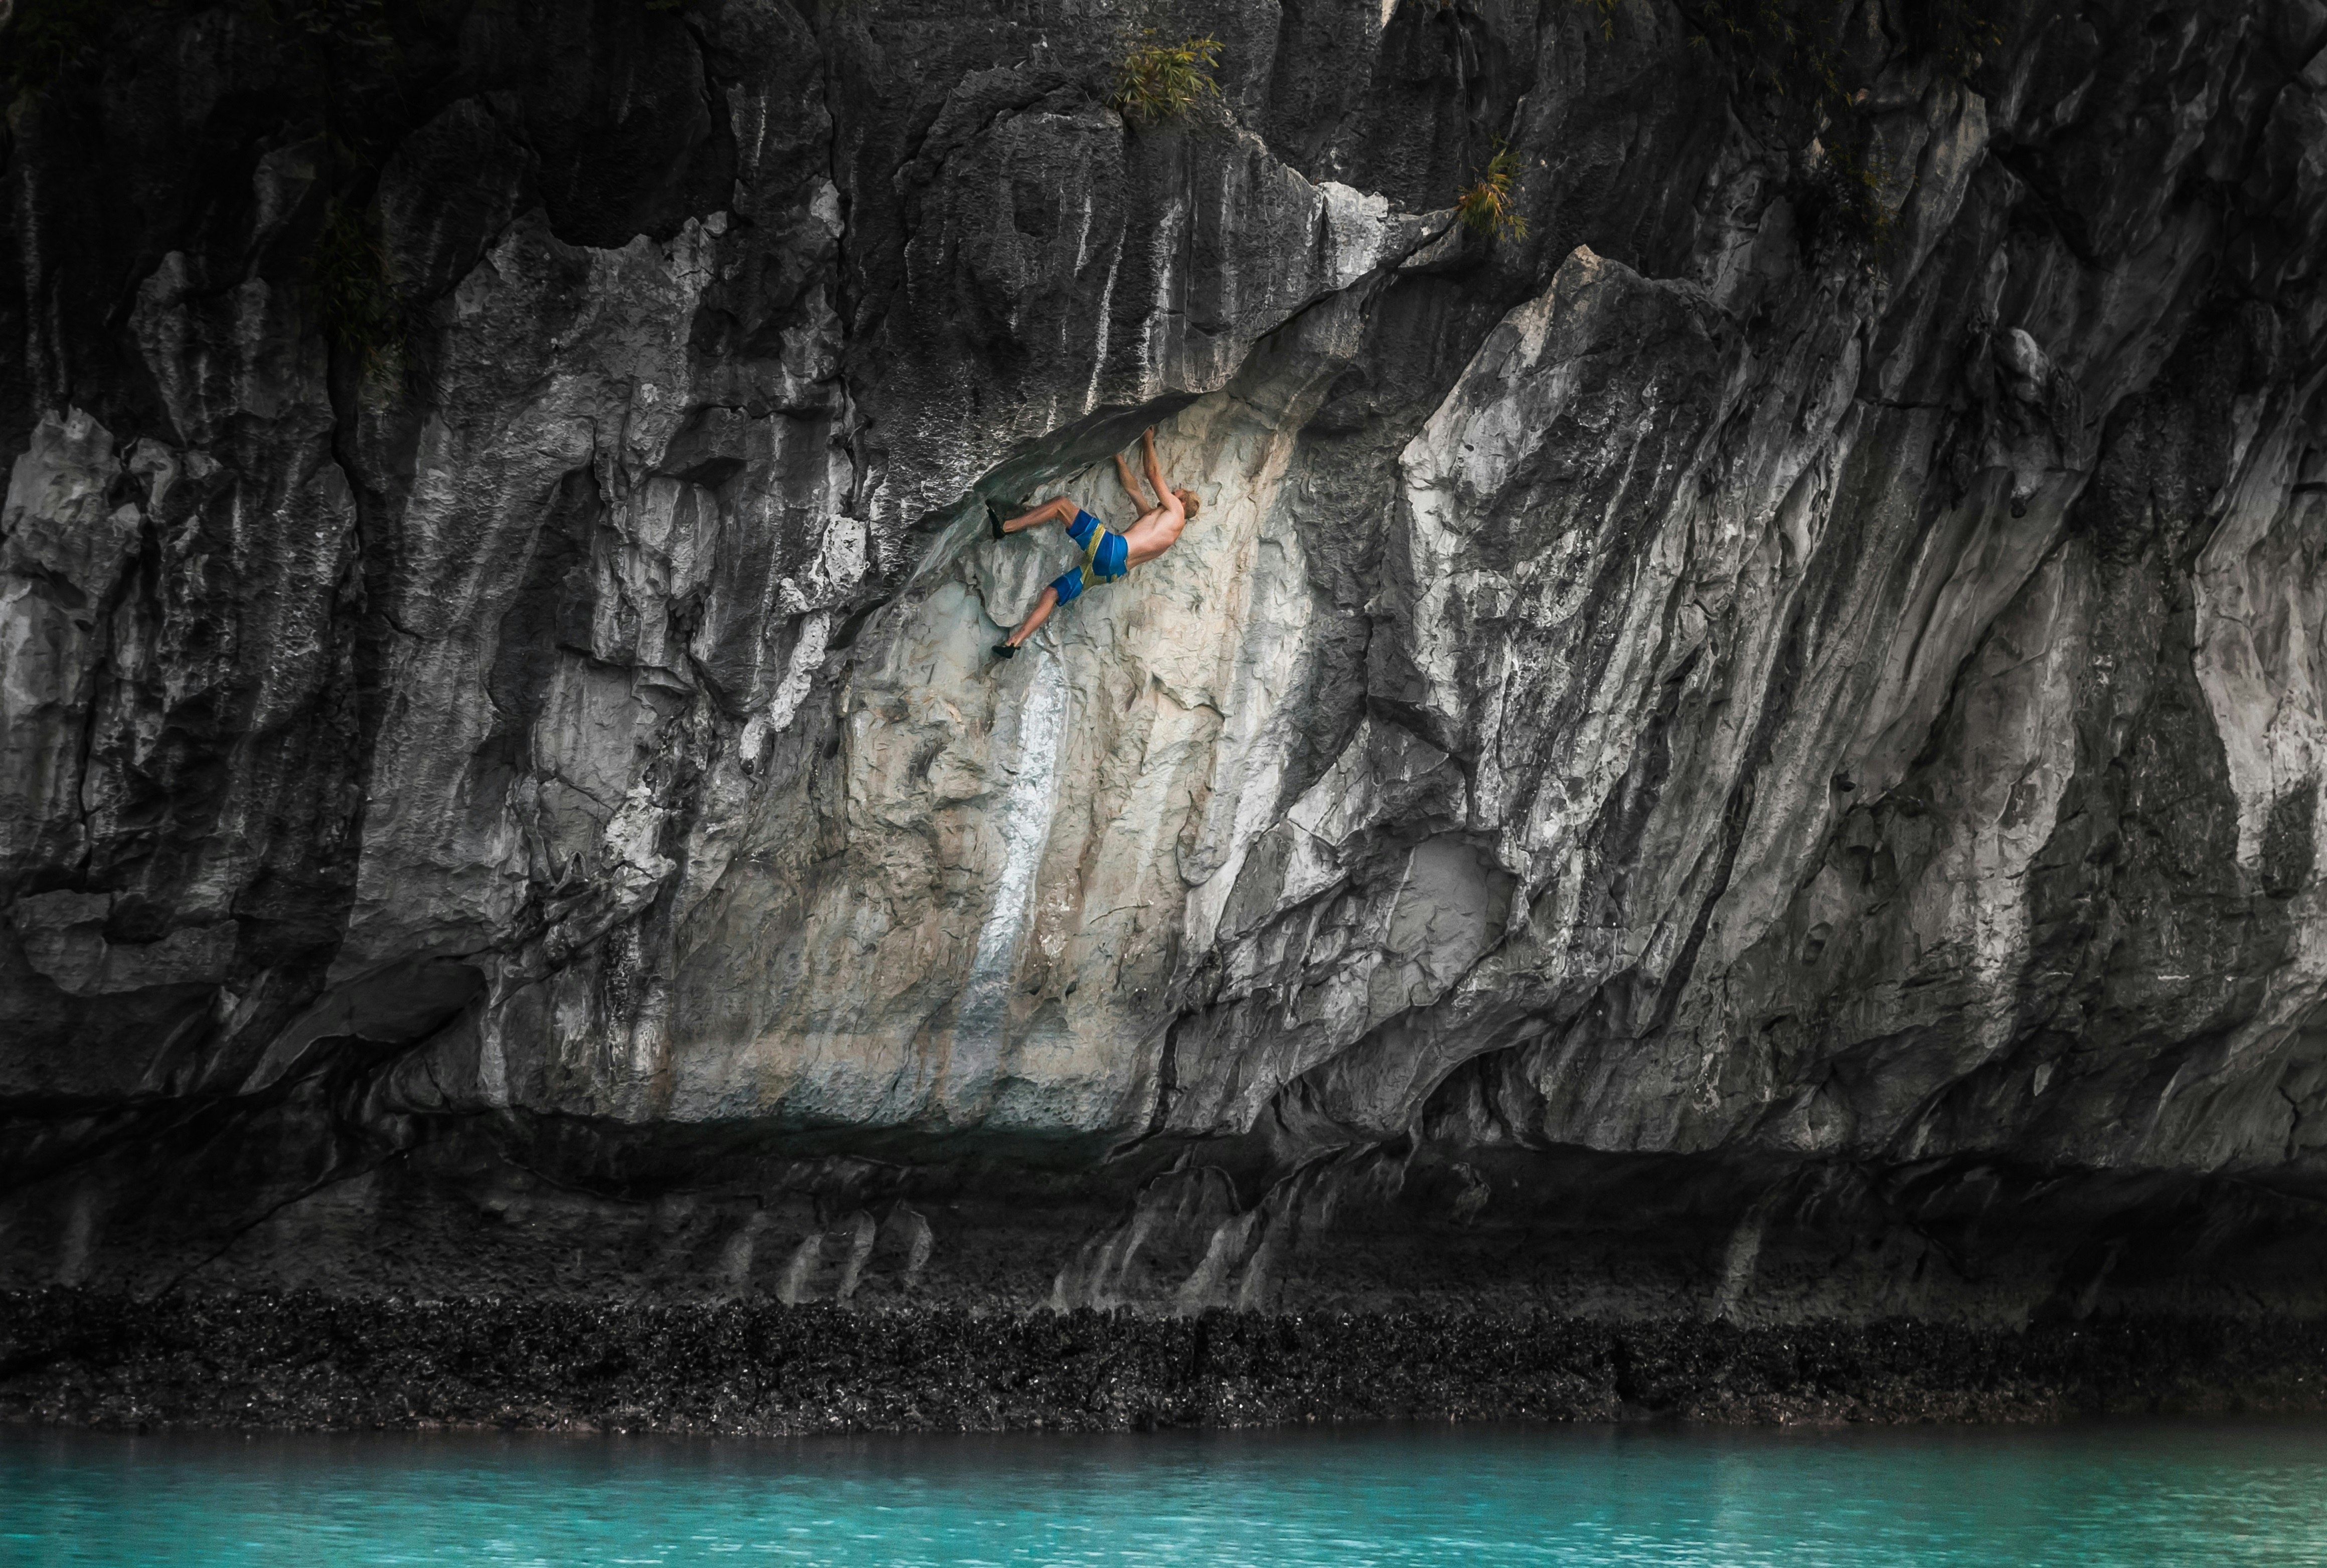 A man clambers up a sheer rock face above a turquoise sea in Cat Ba Island, Vietnam.